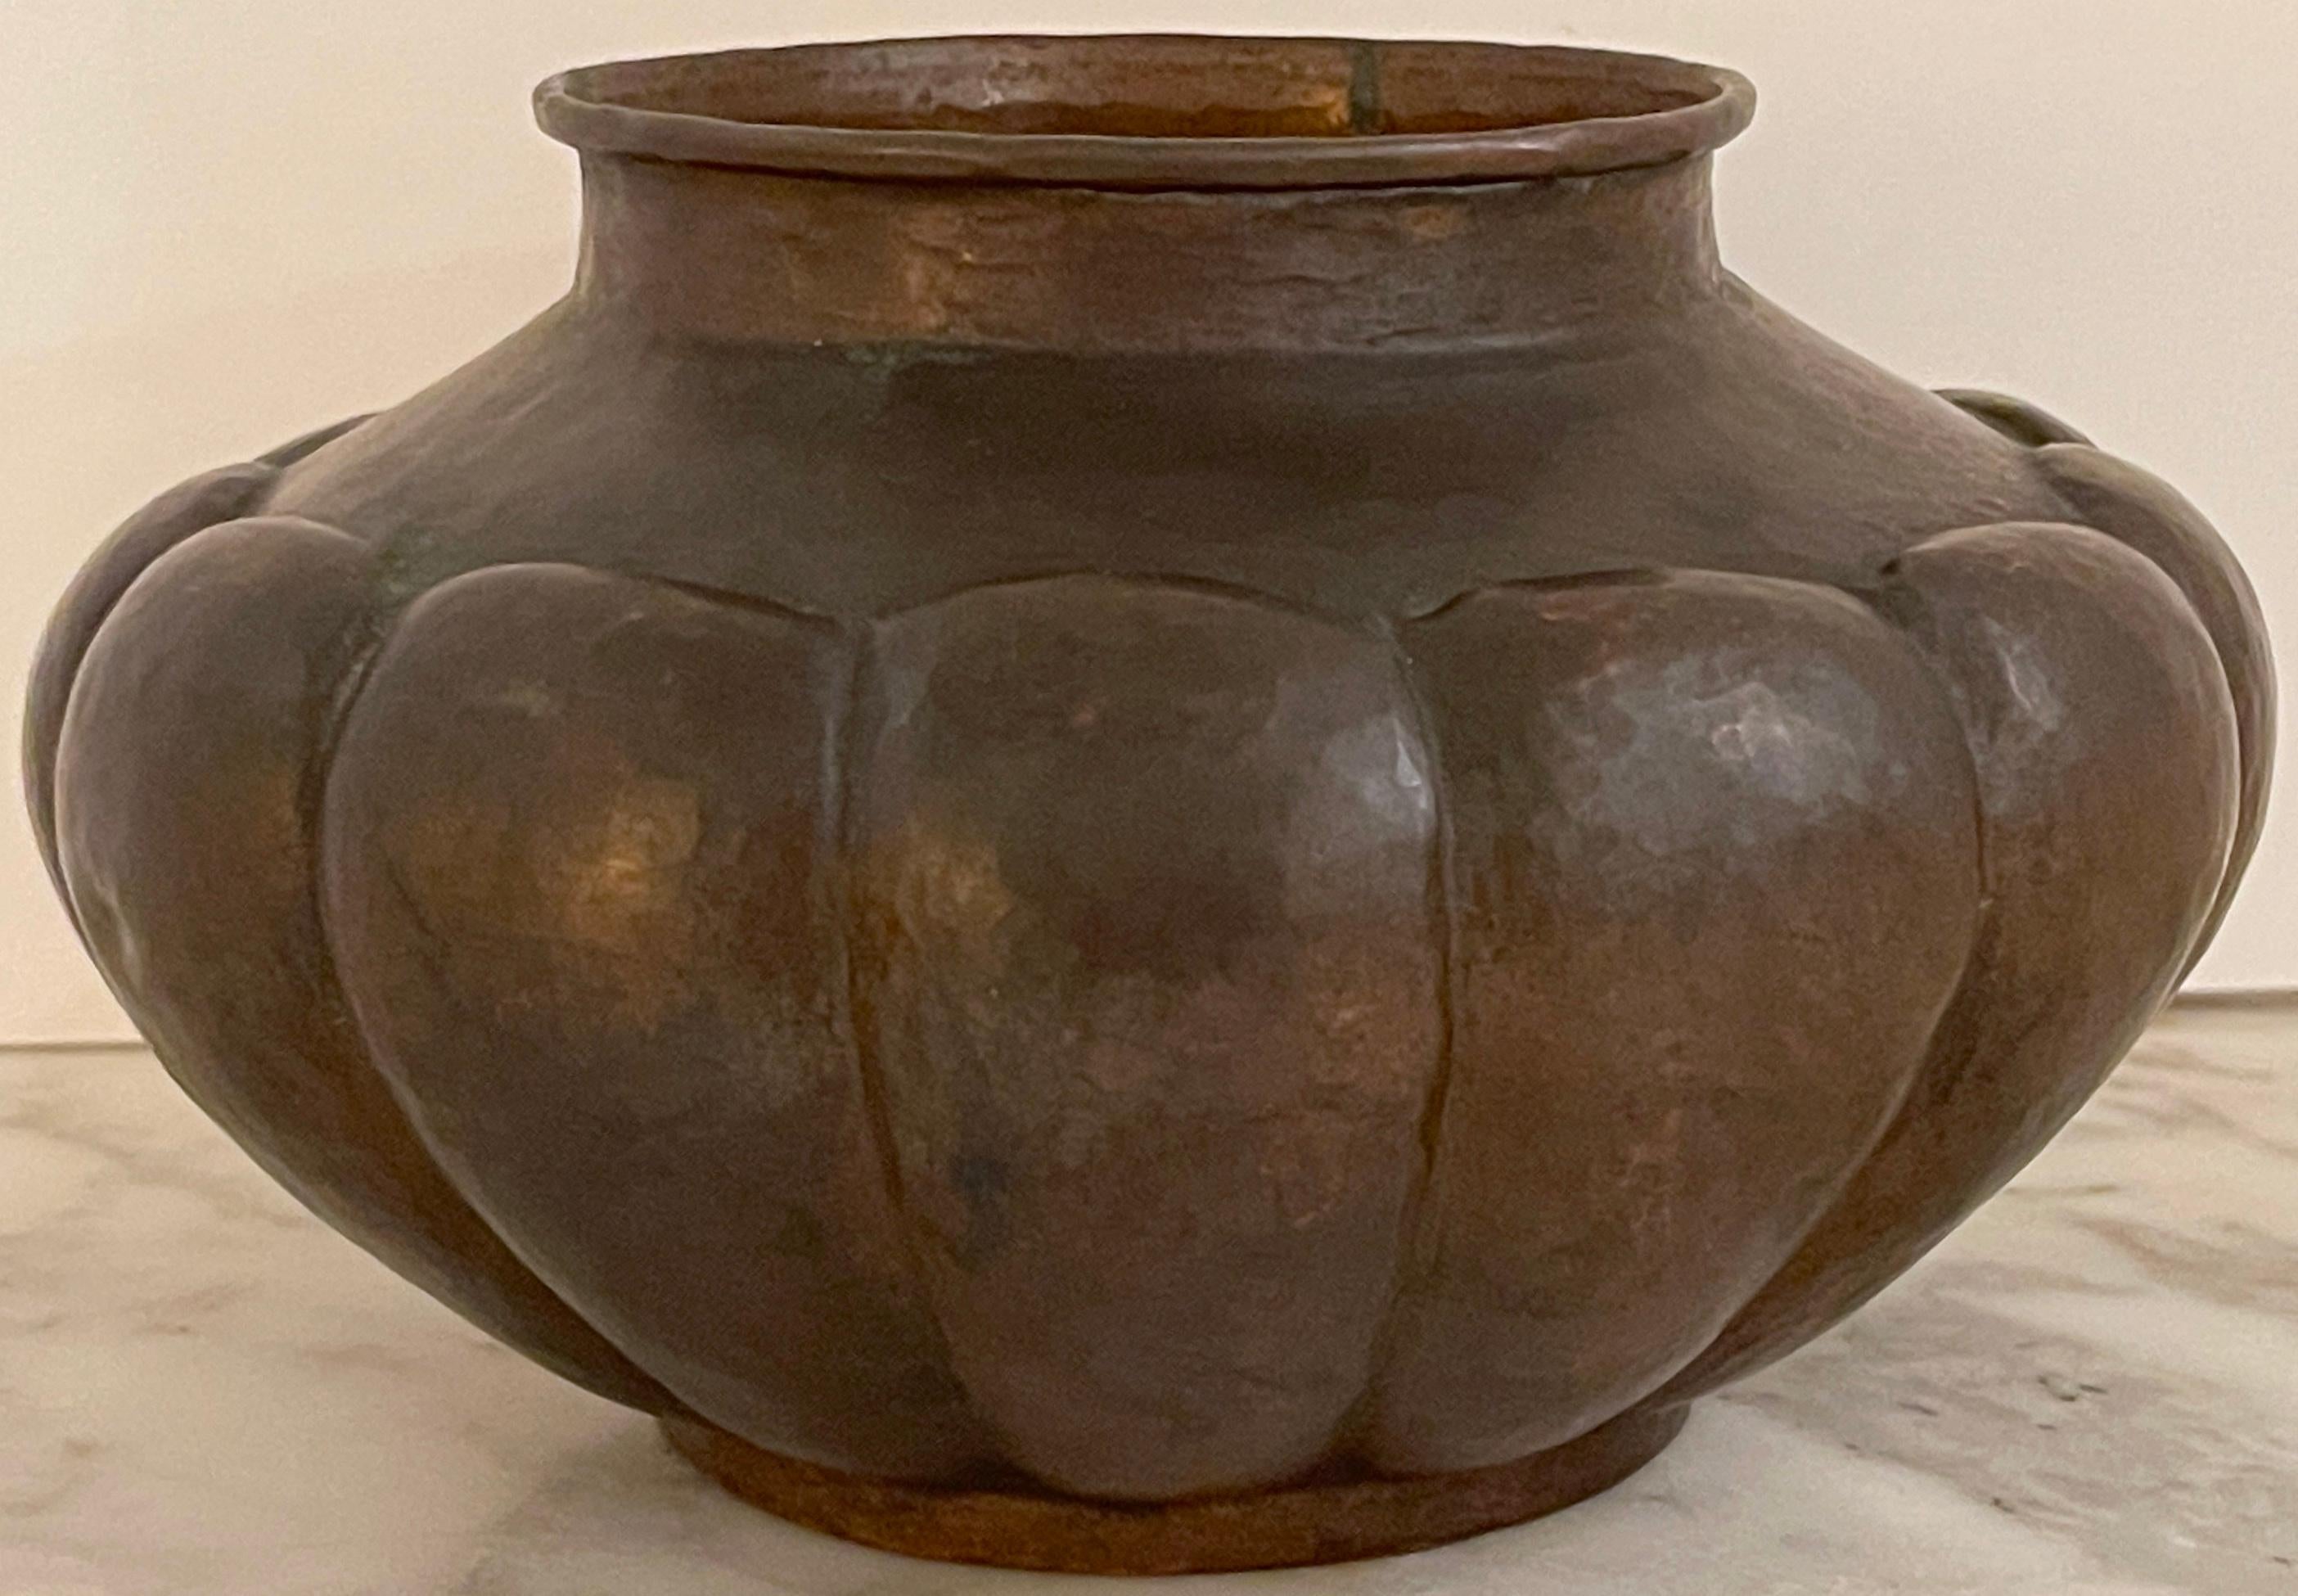 Roycroft Arts & Crafts Copper Forged Bulbous Vase/ Oil Lamp Base Roycroft Inn at East Aurora NY
USA, Circa 1905

Available for acquisition is this fine Roycroft Arts & Crafts Copper Forged Bulbous Vase, with roots tracing back to the renowned